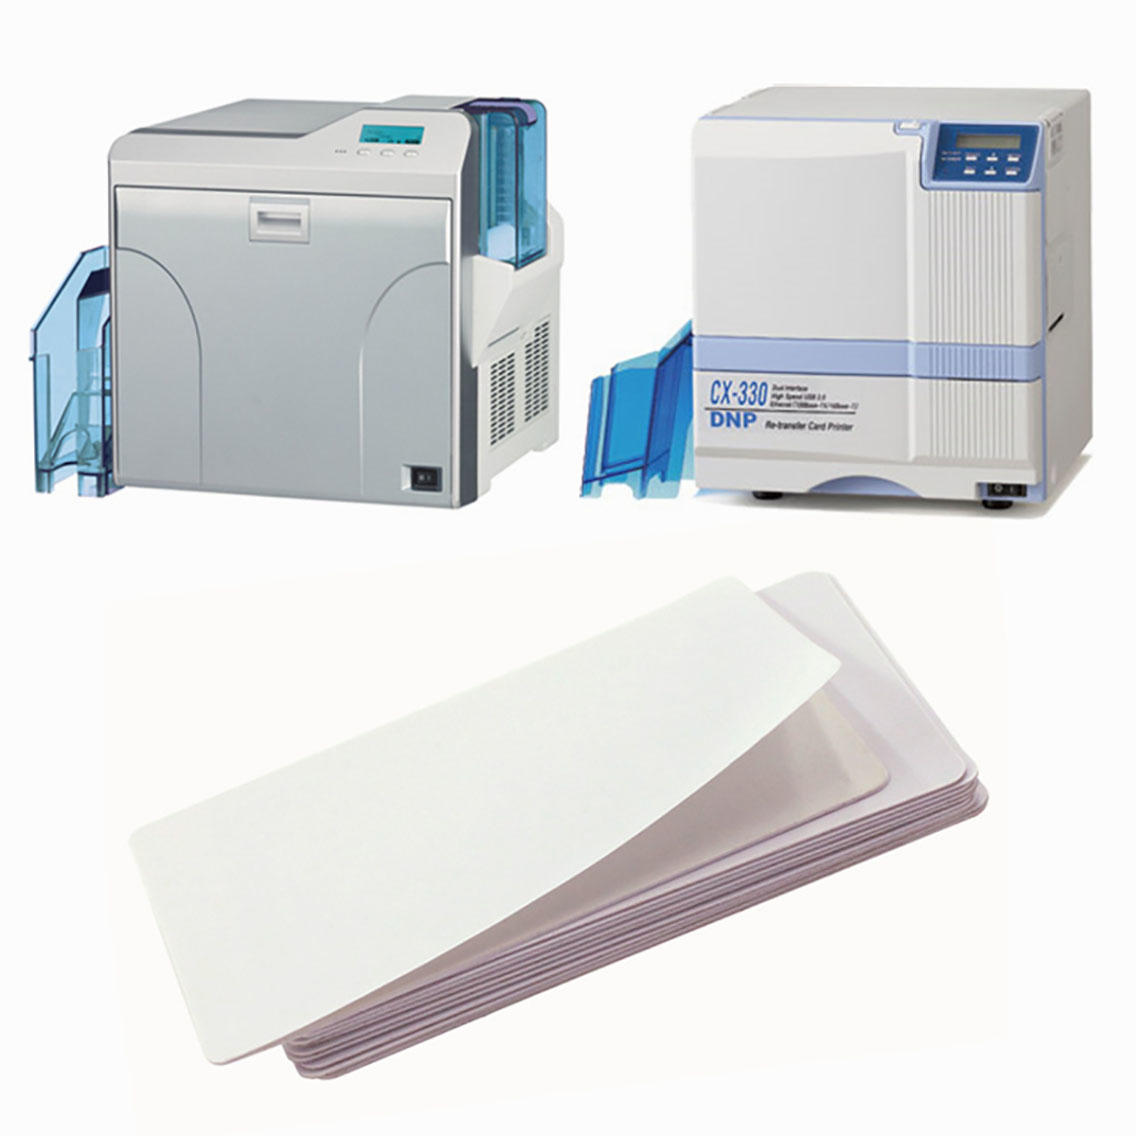 Cleanmo durable Dai Nippon IPA Cleaning Cards manufacturer for DNP CX-210, CX-320 & CX-330 Printers